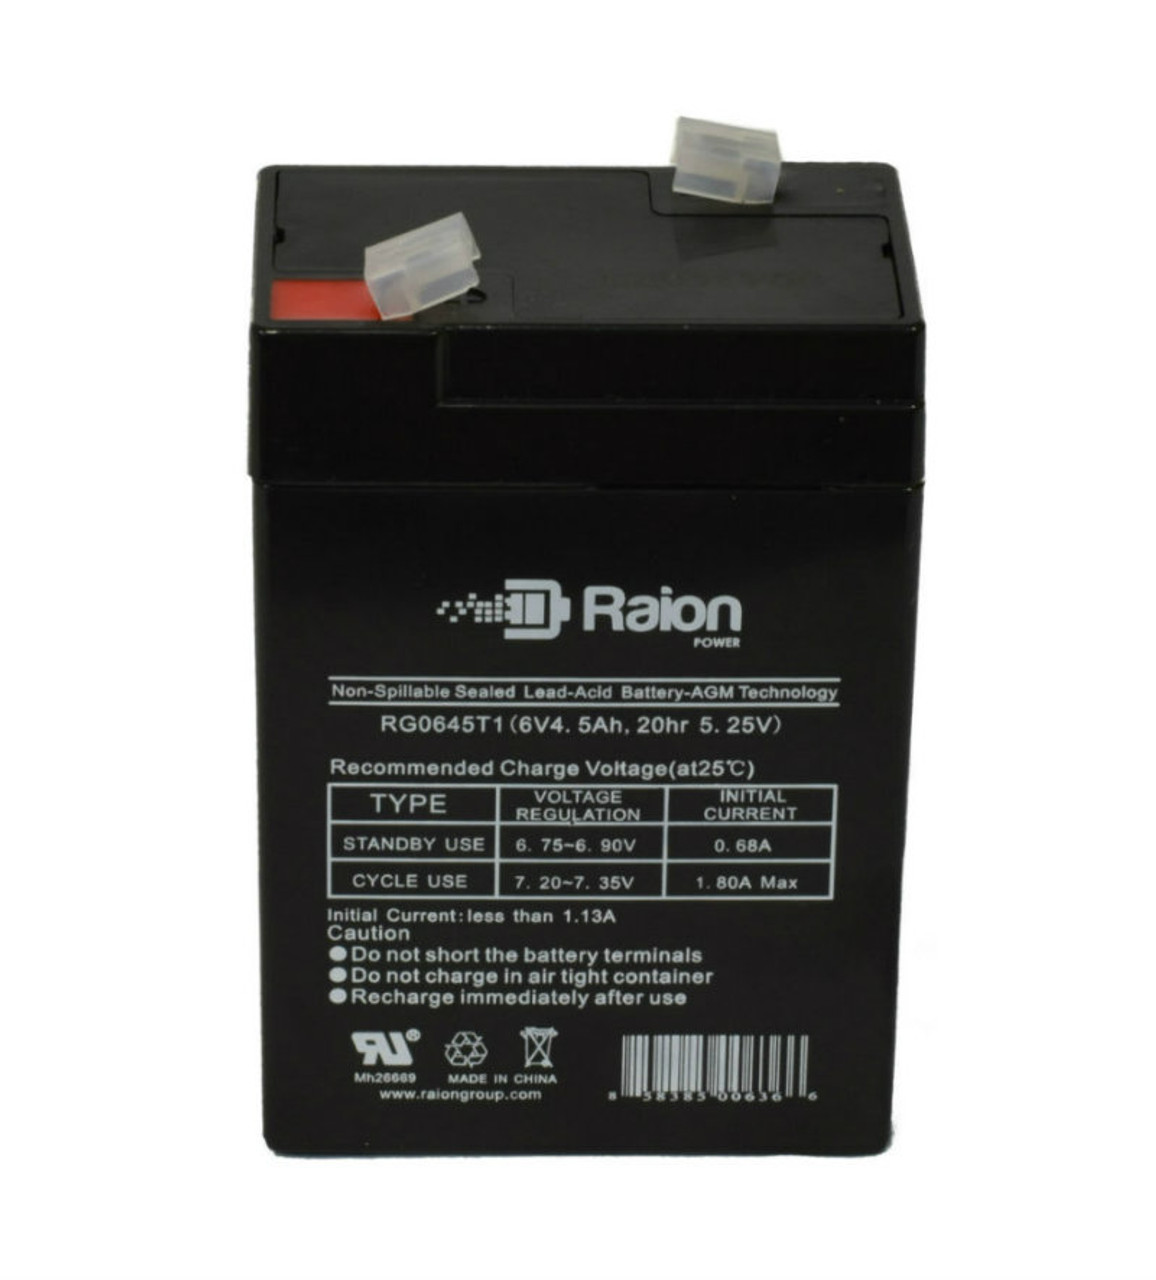 Raion Power RG0645T1 Replacement Battery Cartridge for Sheng Yang SY645